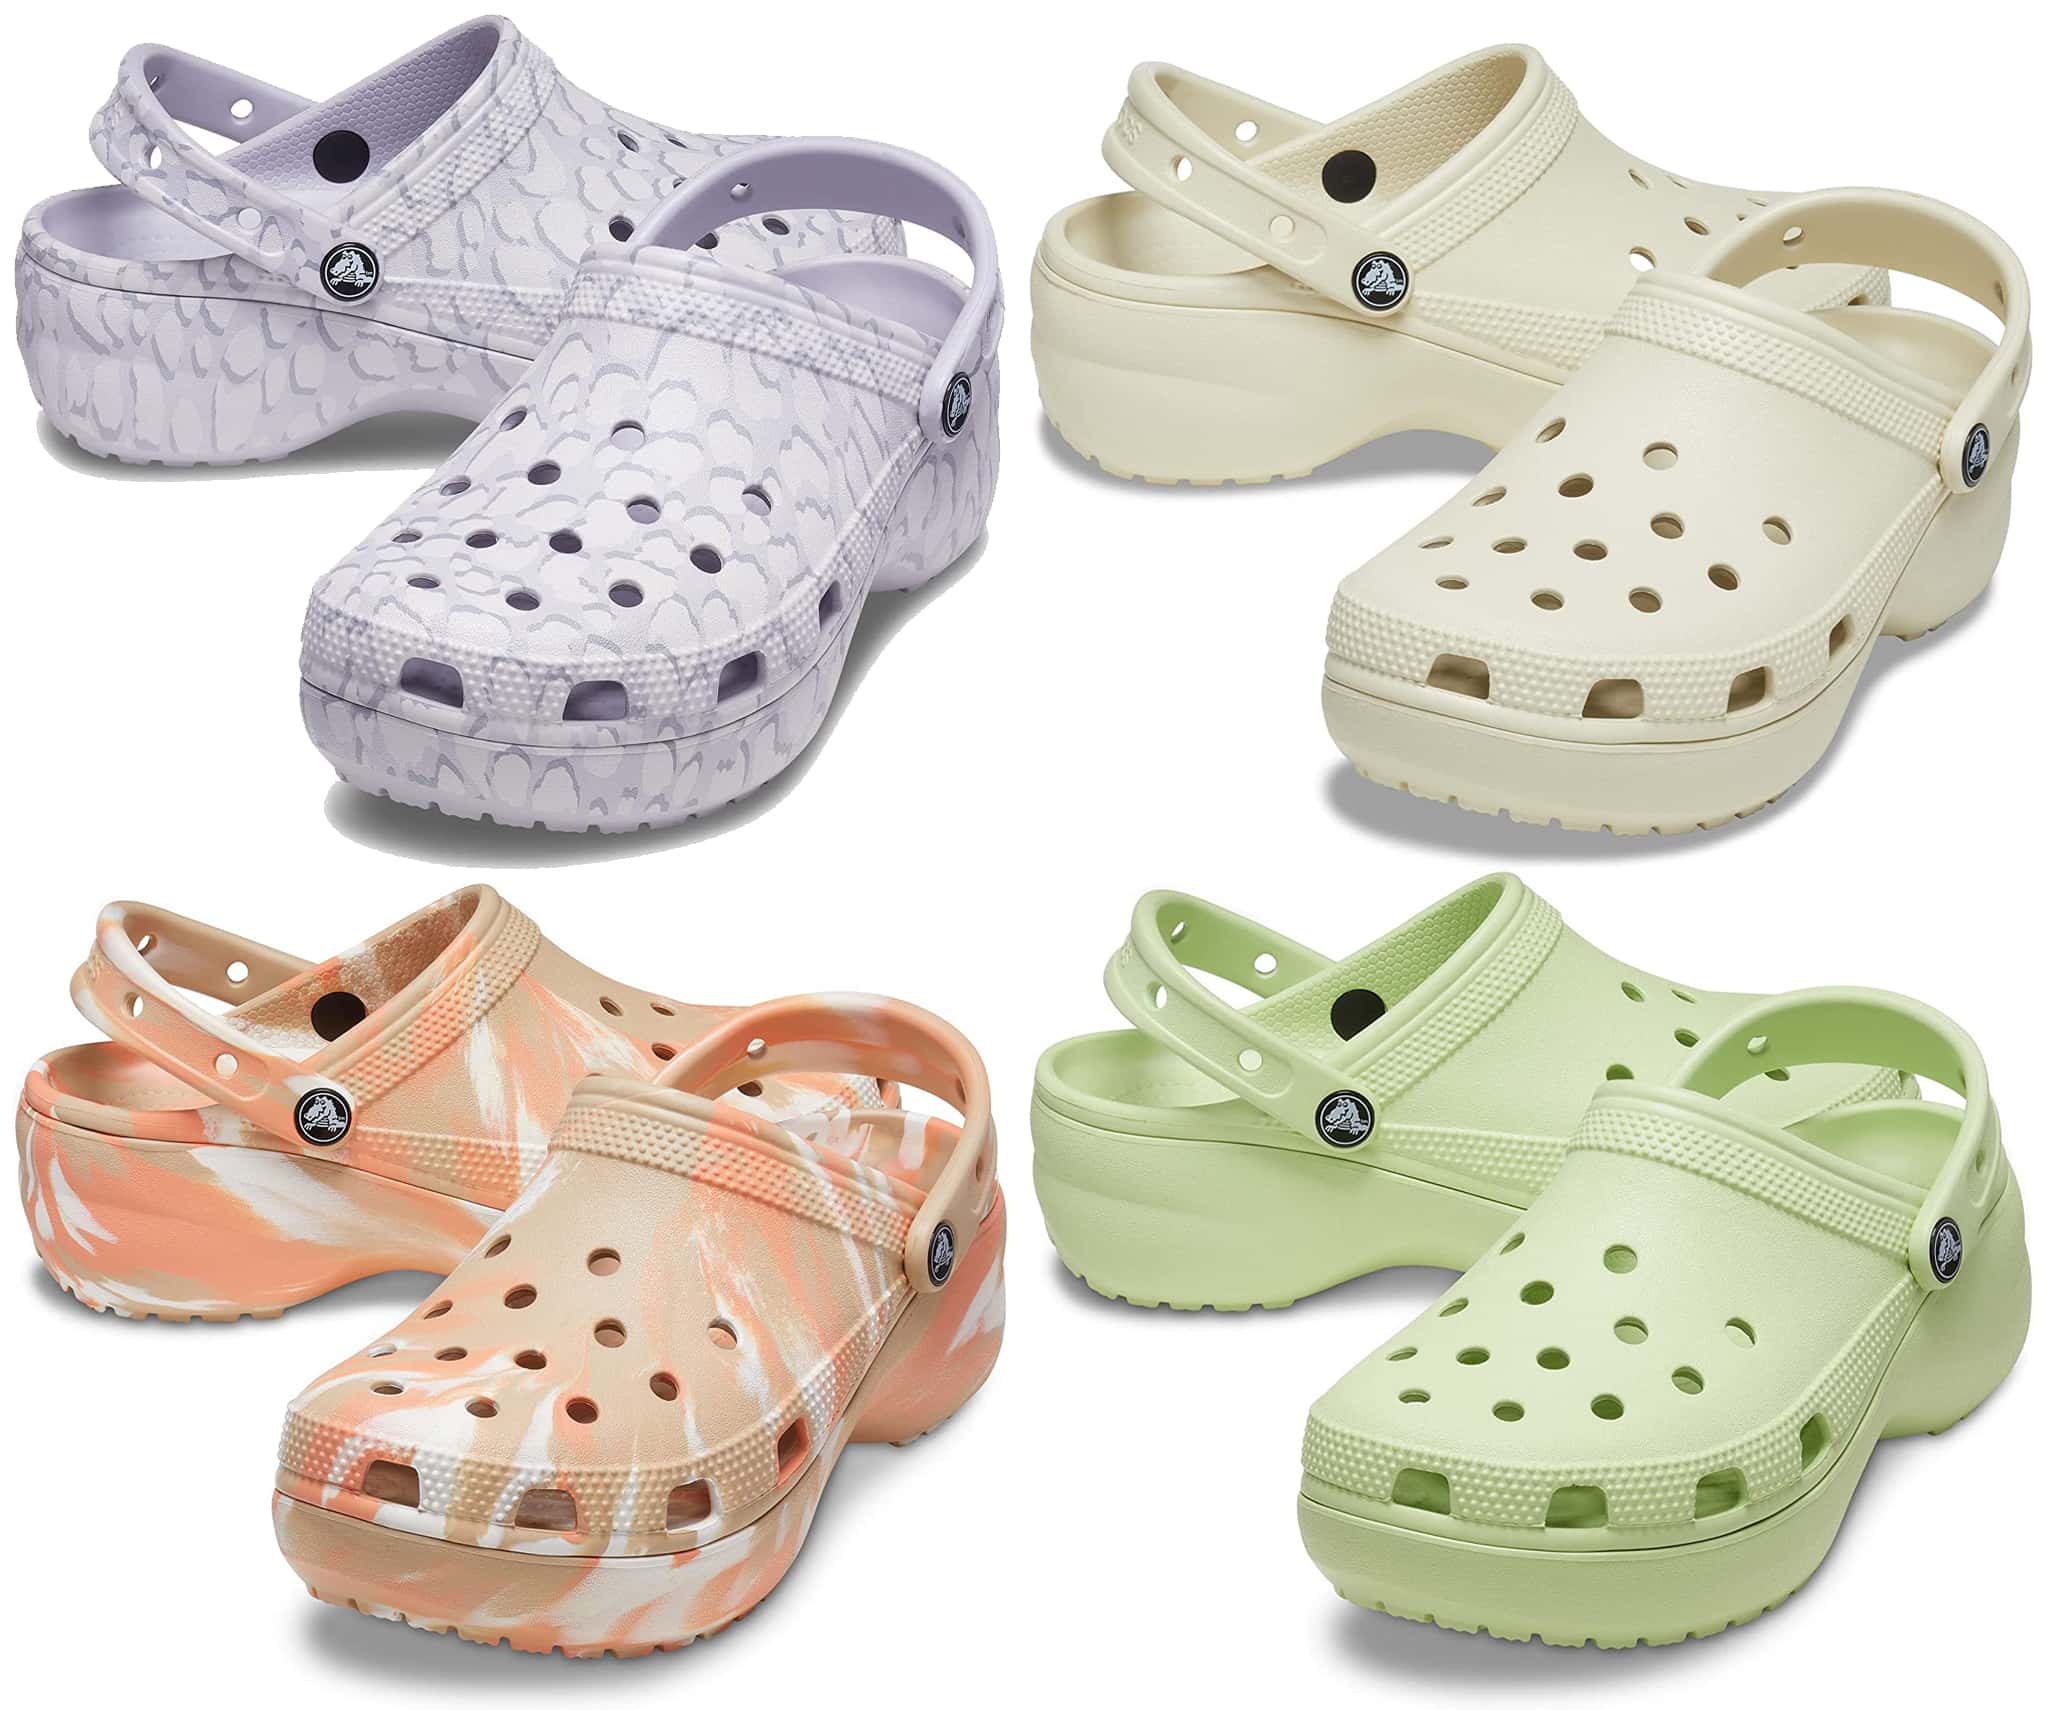 Crocs' classic clogs updated with a heightened, contoured outsole made from Legendary Croslite foam cushioning for all-day comfort and support